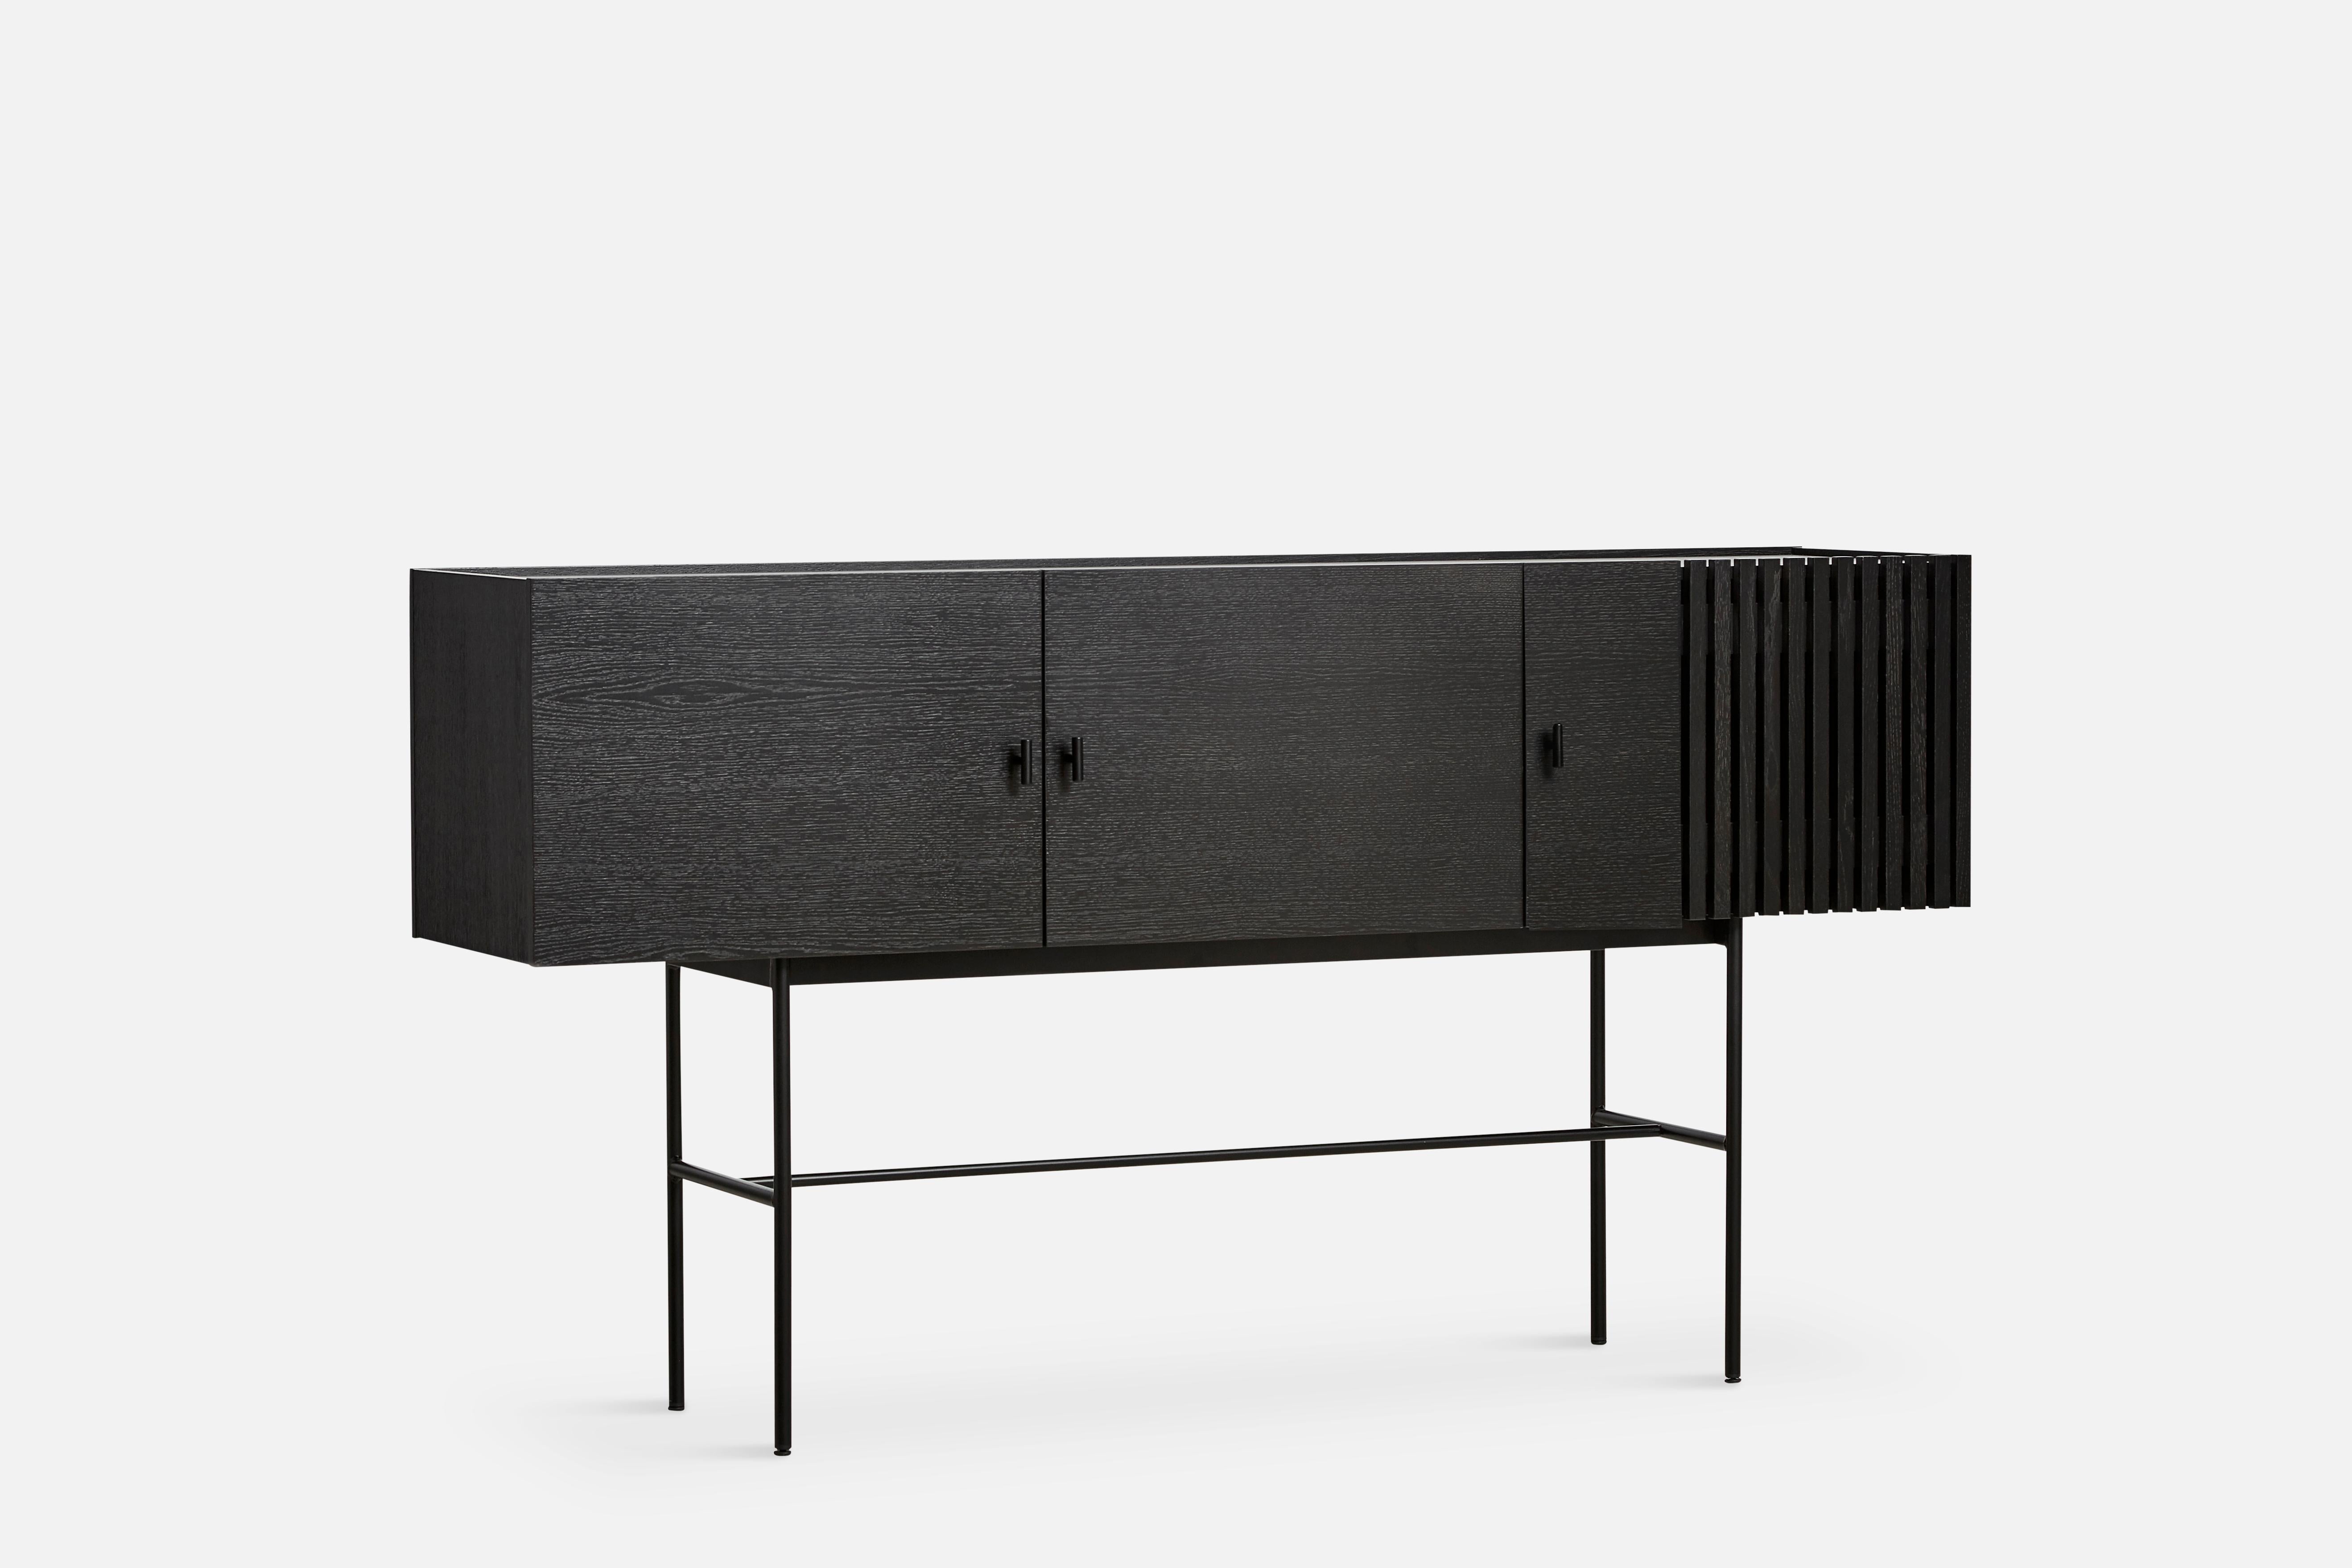 Black oak array sideboard 180 by Says Who.
Materials: oak, metal.
Dimensions: D 44 x W 180 x H 97 cm
Also available in different colours and materials.

The founders, Mia and Torben Koed, decided to put their 30 years of experience into a new